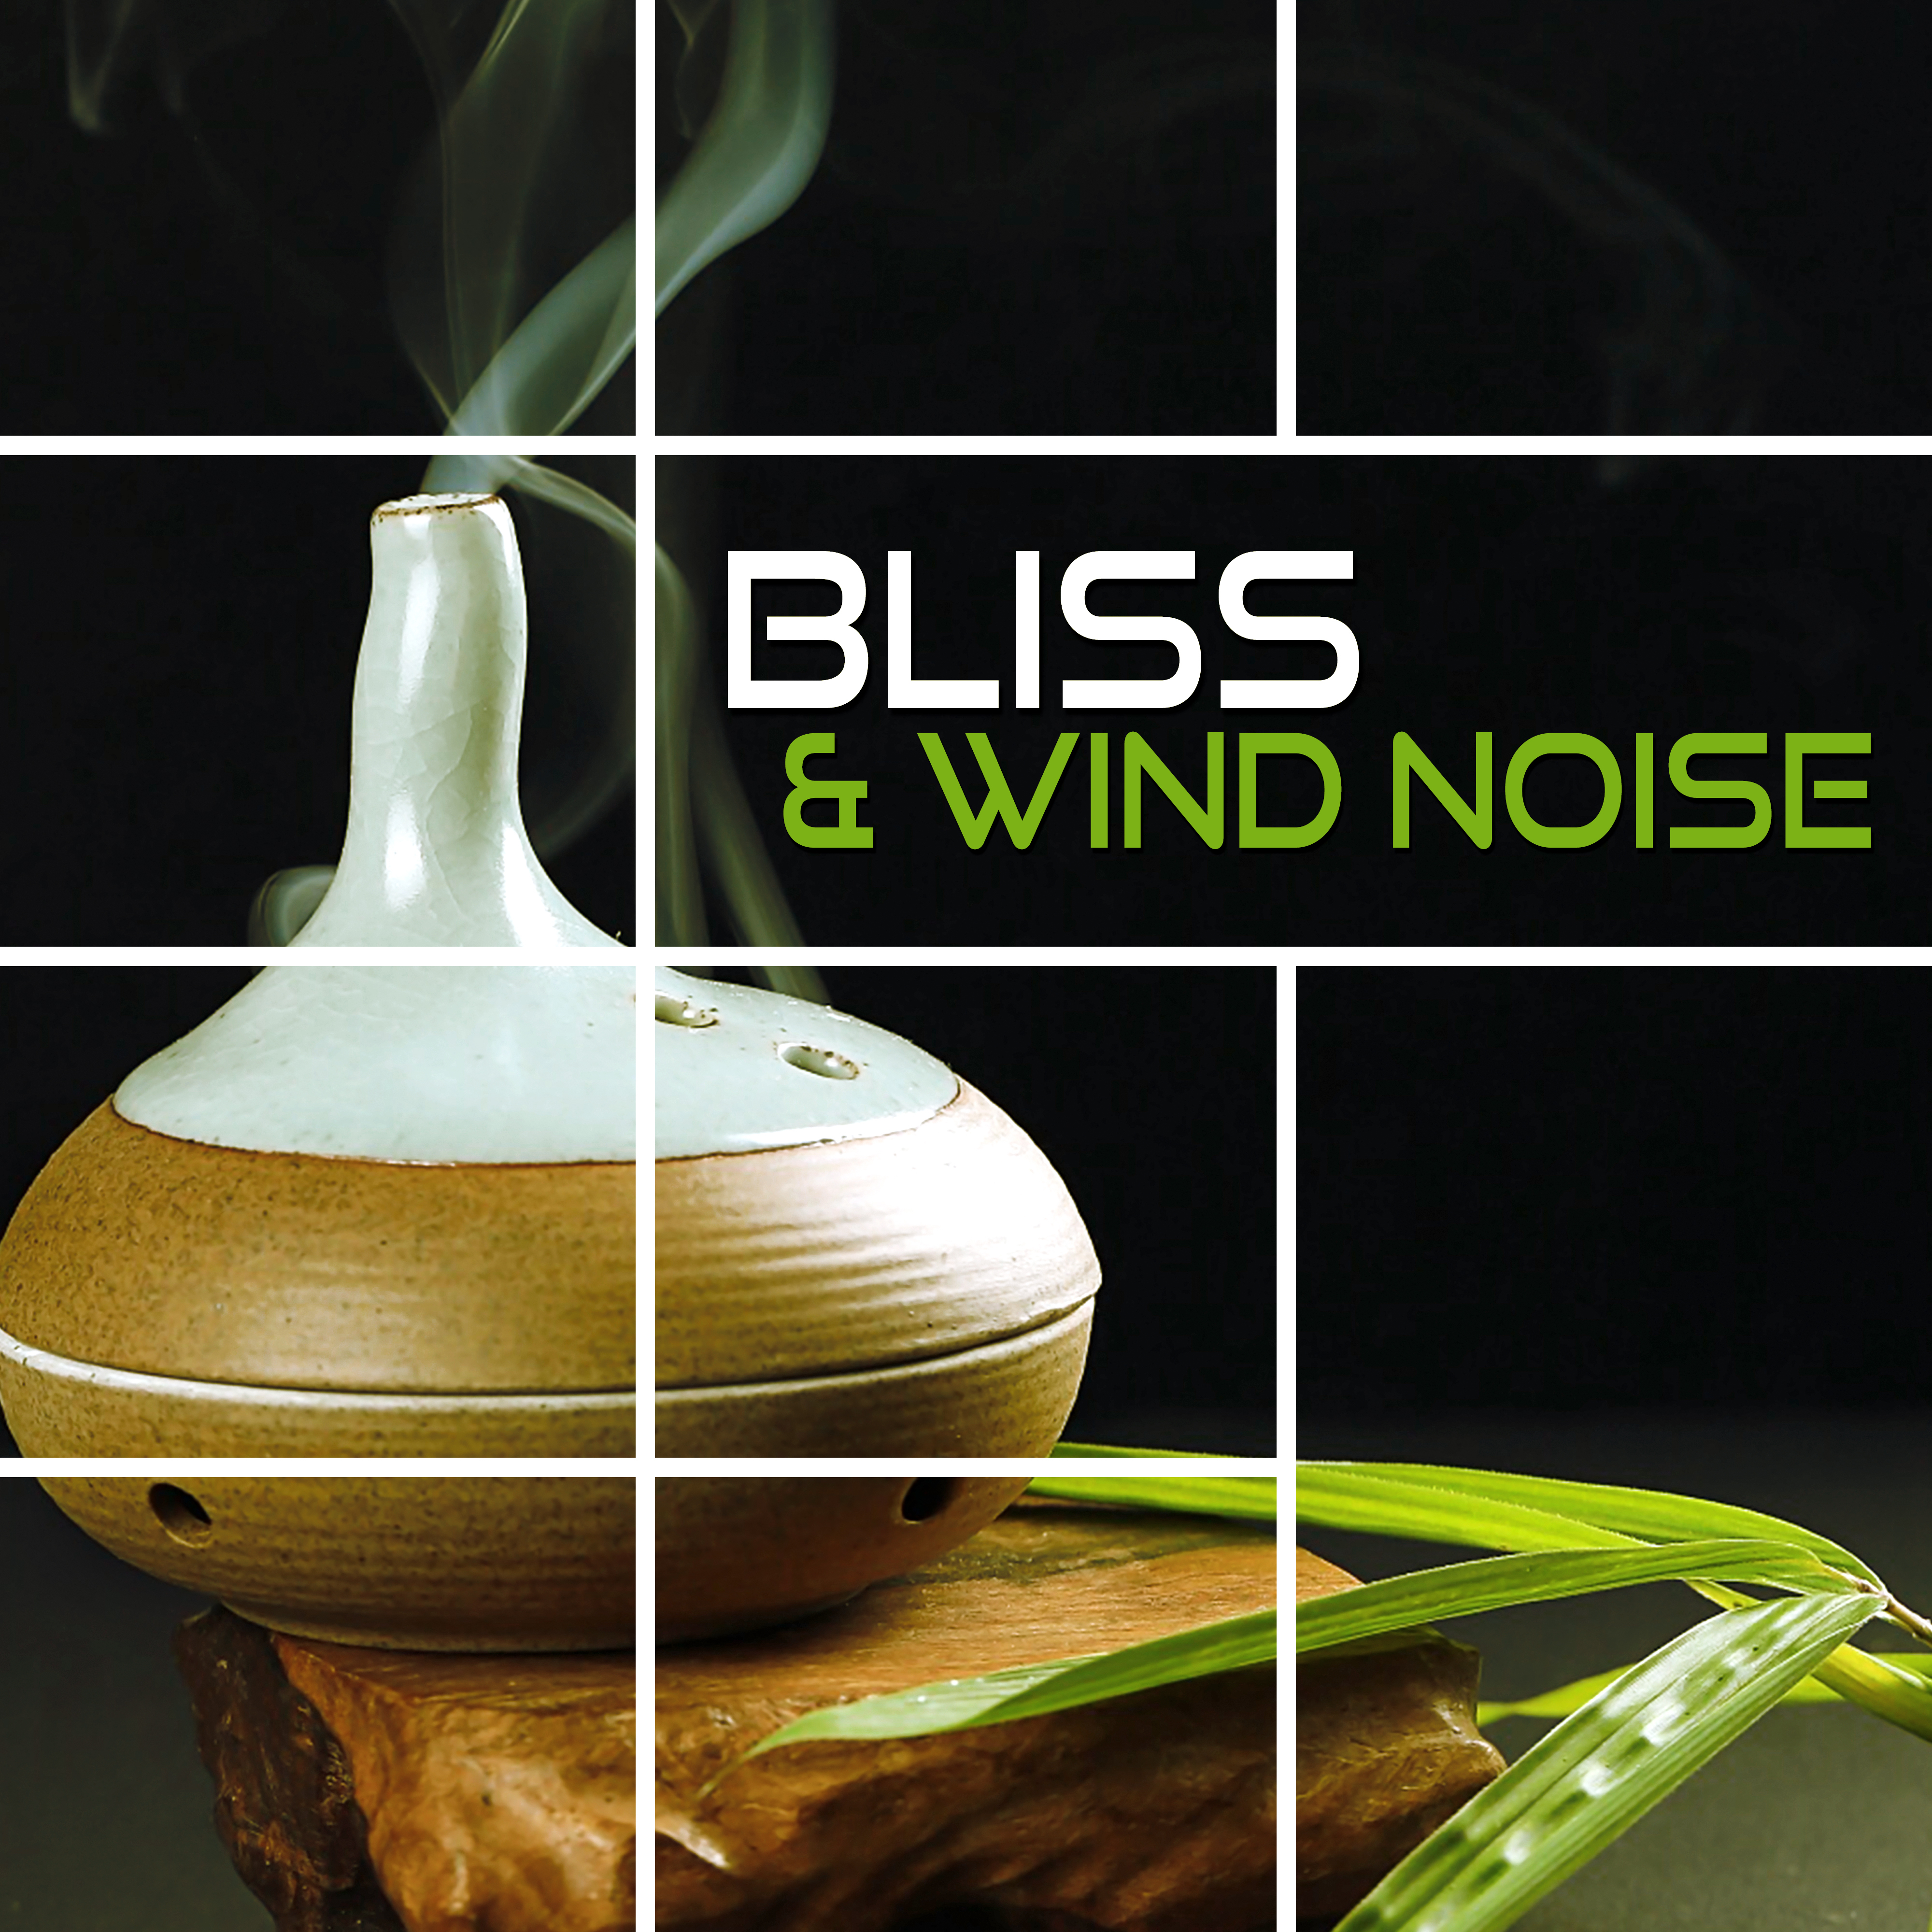 Bliss  Wind Noise  Music for Relaxation  Meditation, Sleep Song, Lucid Dream, Binaural Beats with Delta Waves